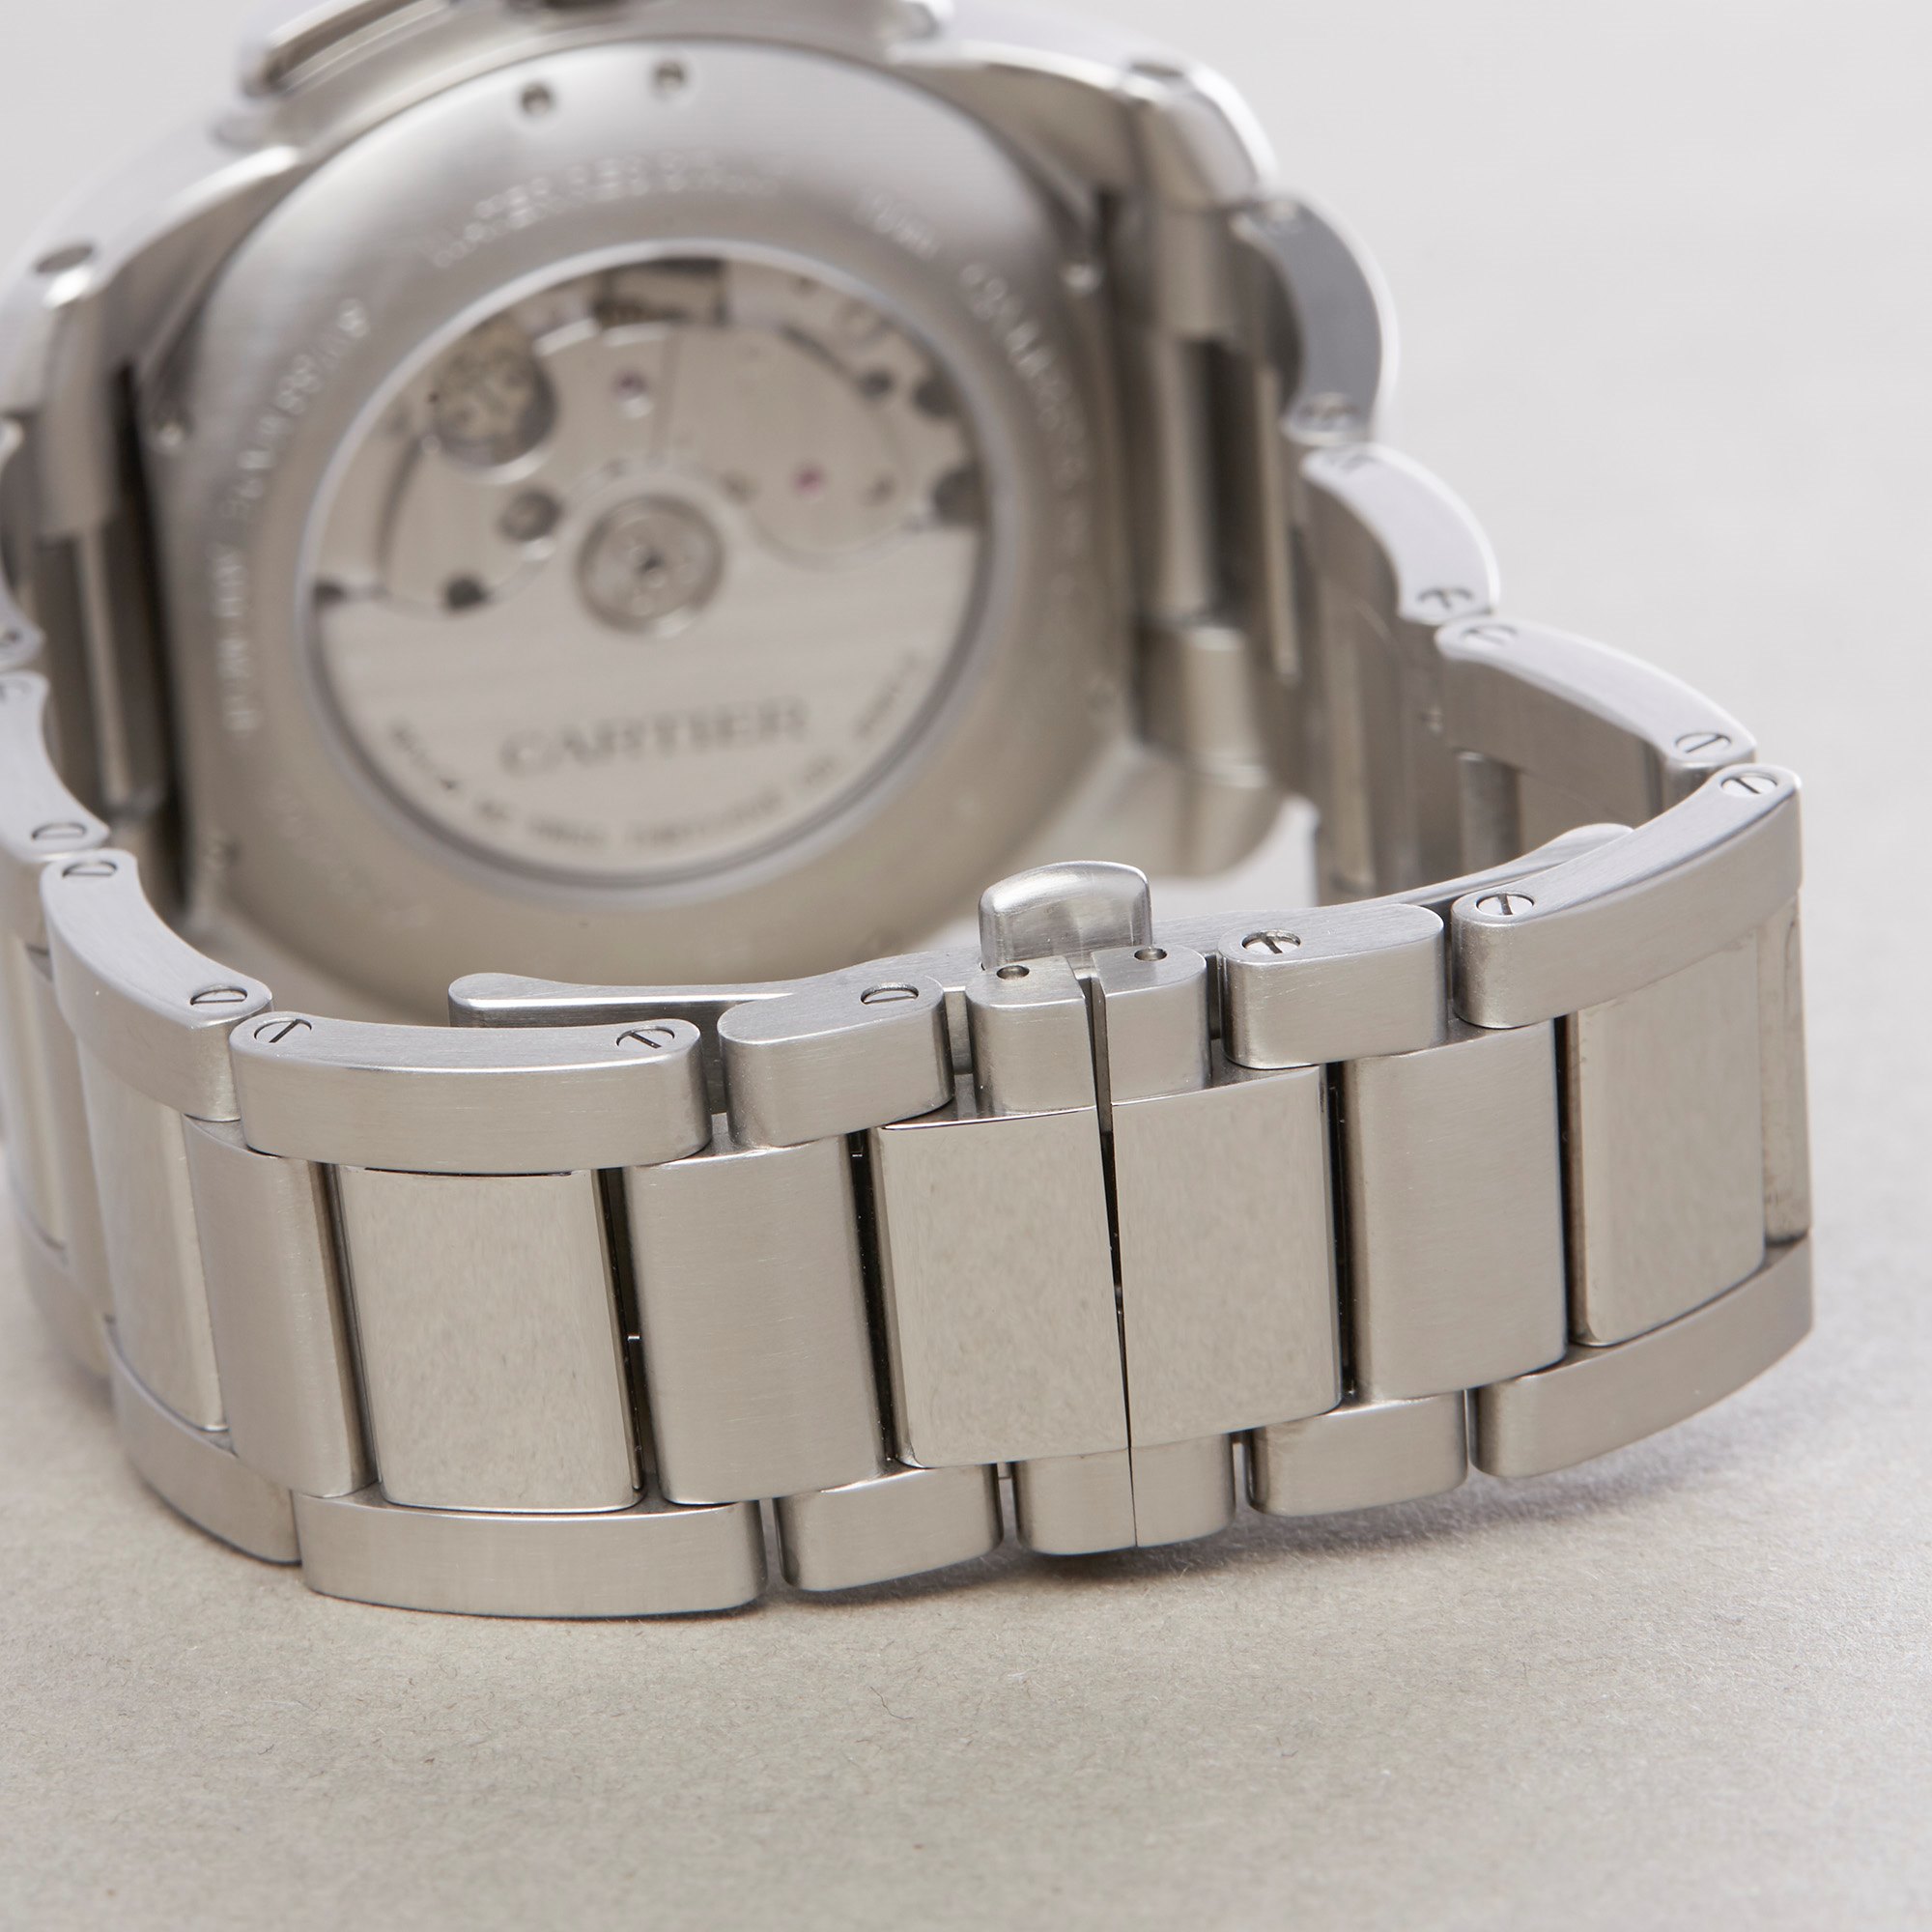 Cartier Calibre de Cartier Chronograph Stainless Steel Watch W7100045 or 3578 - Image 7 of 10